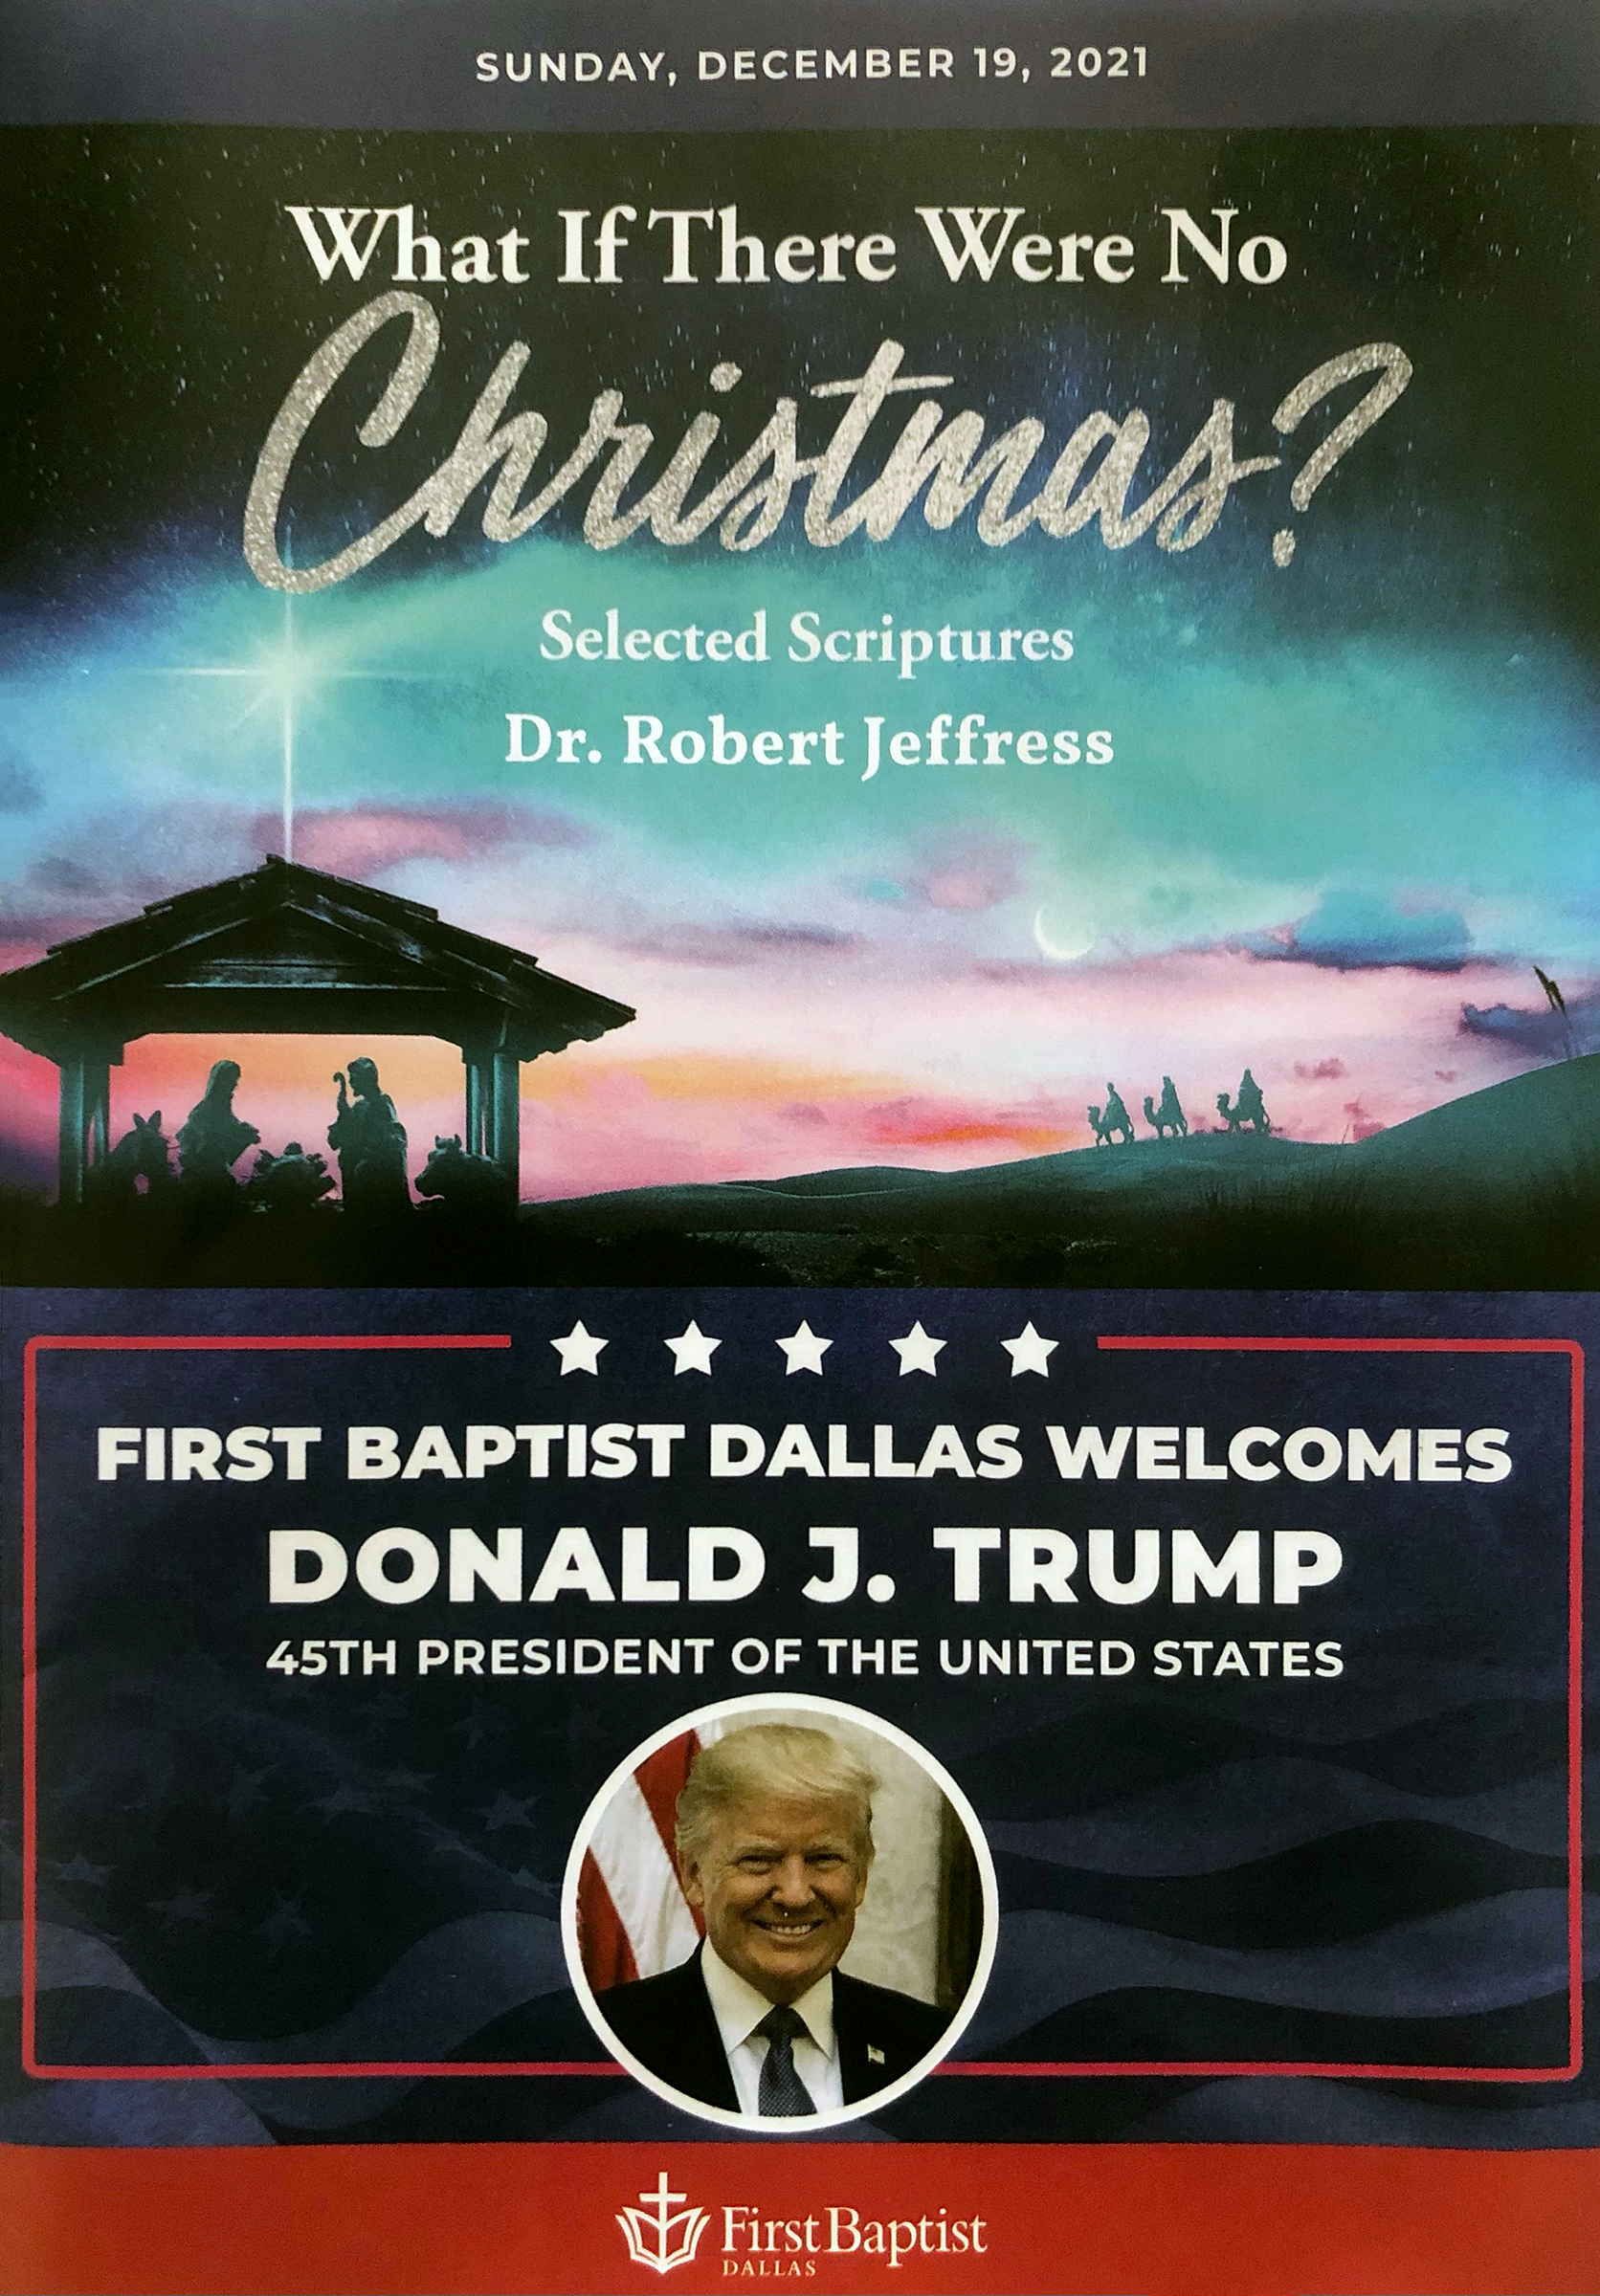 A program from the What If There Were No Chrismas? event on Sunday December 19, 2021.